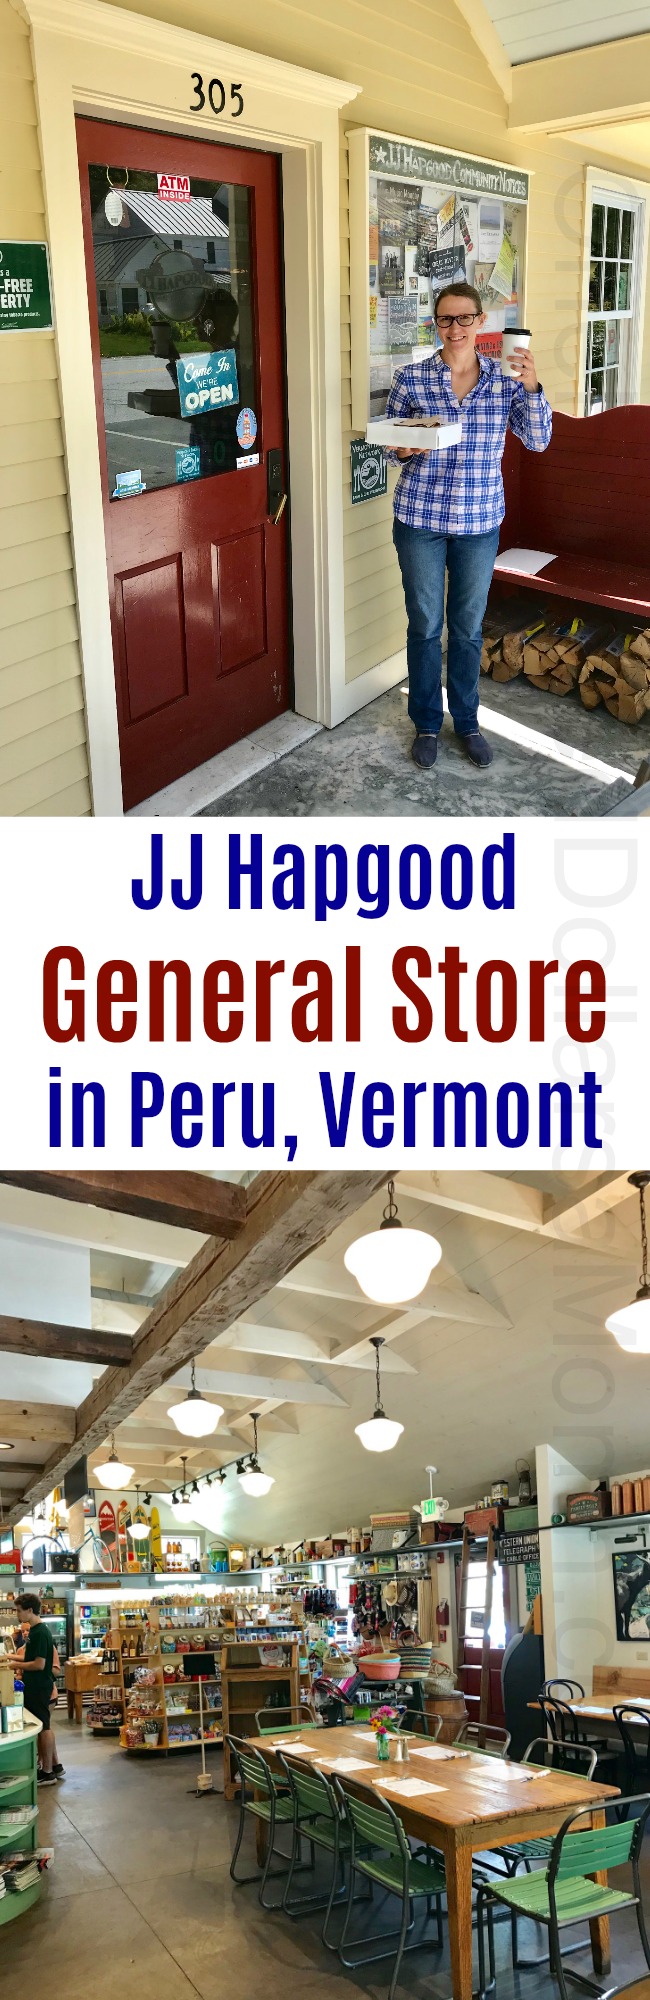 JJ Hapgood General Store & Eatery in Peru, Vermont